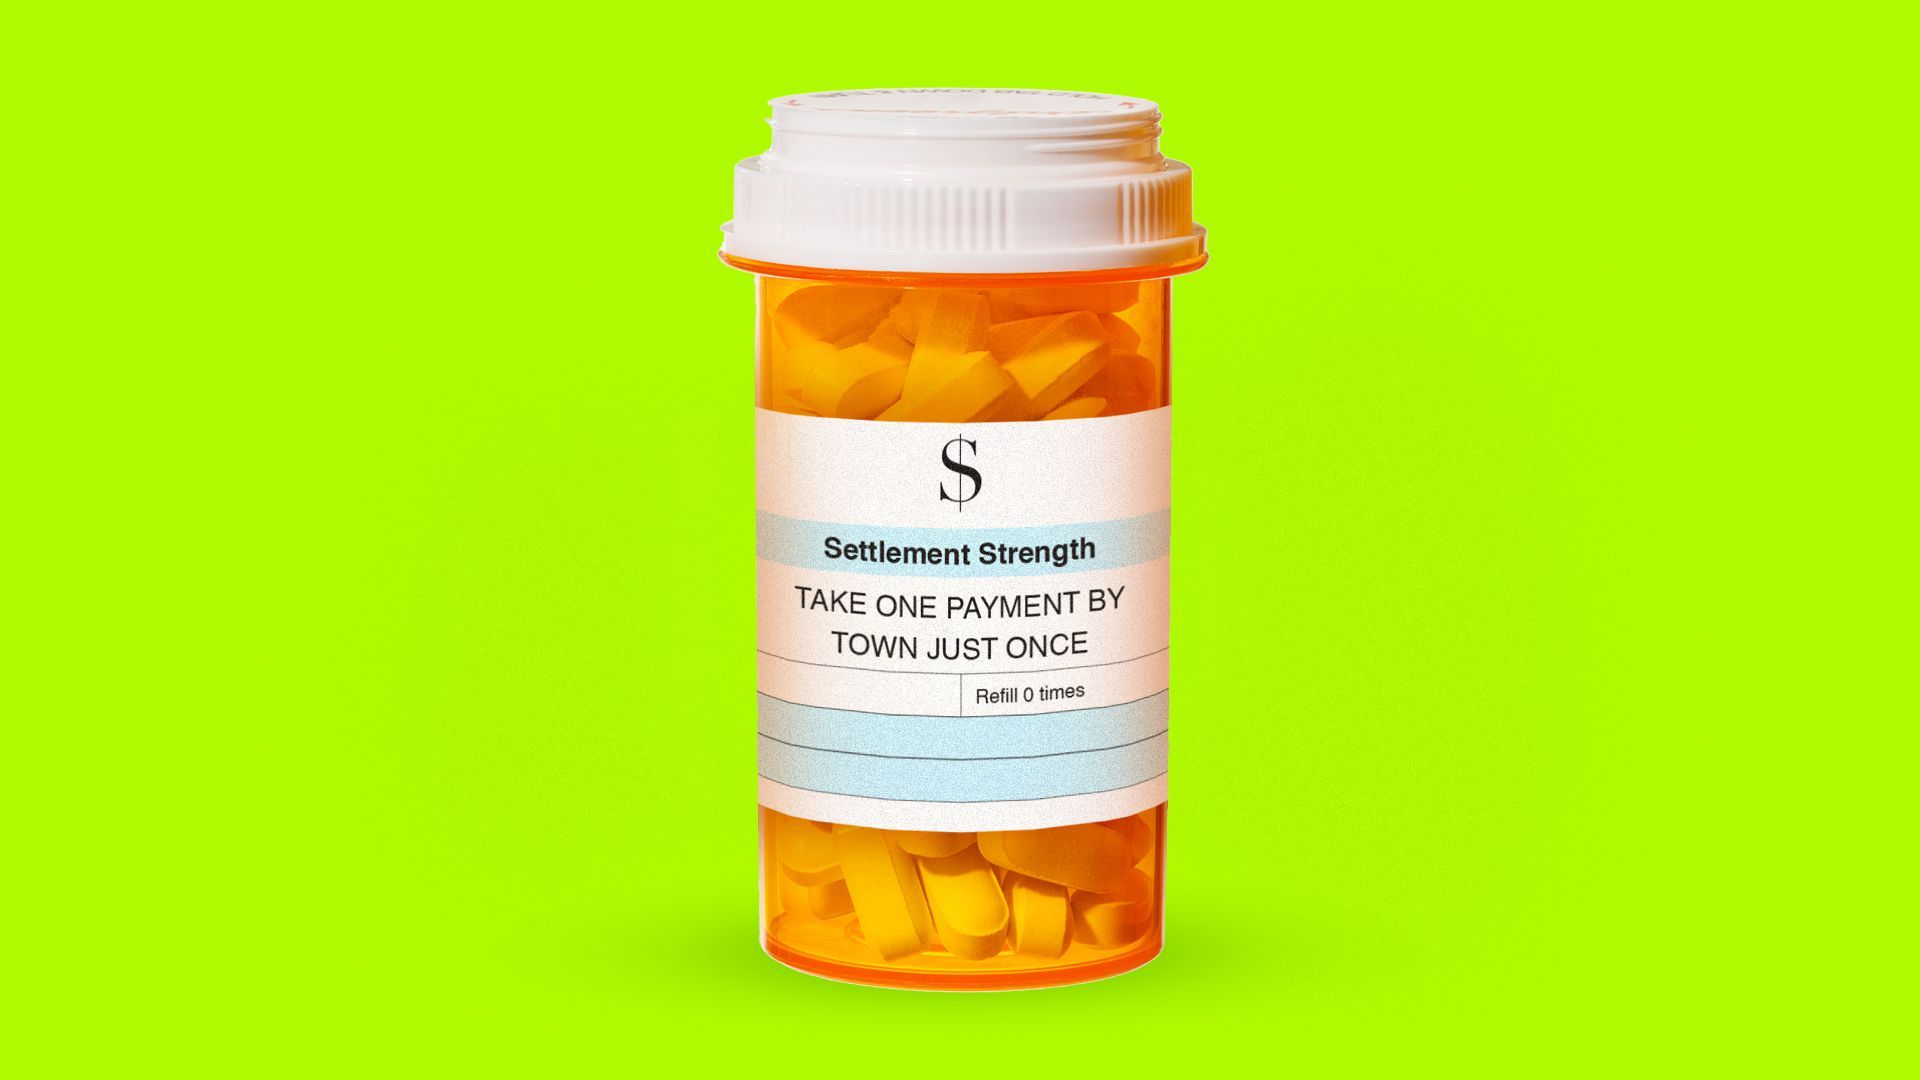 A pill bottle that talks about an opioid lawsuit settlement on the label